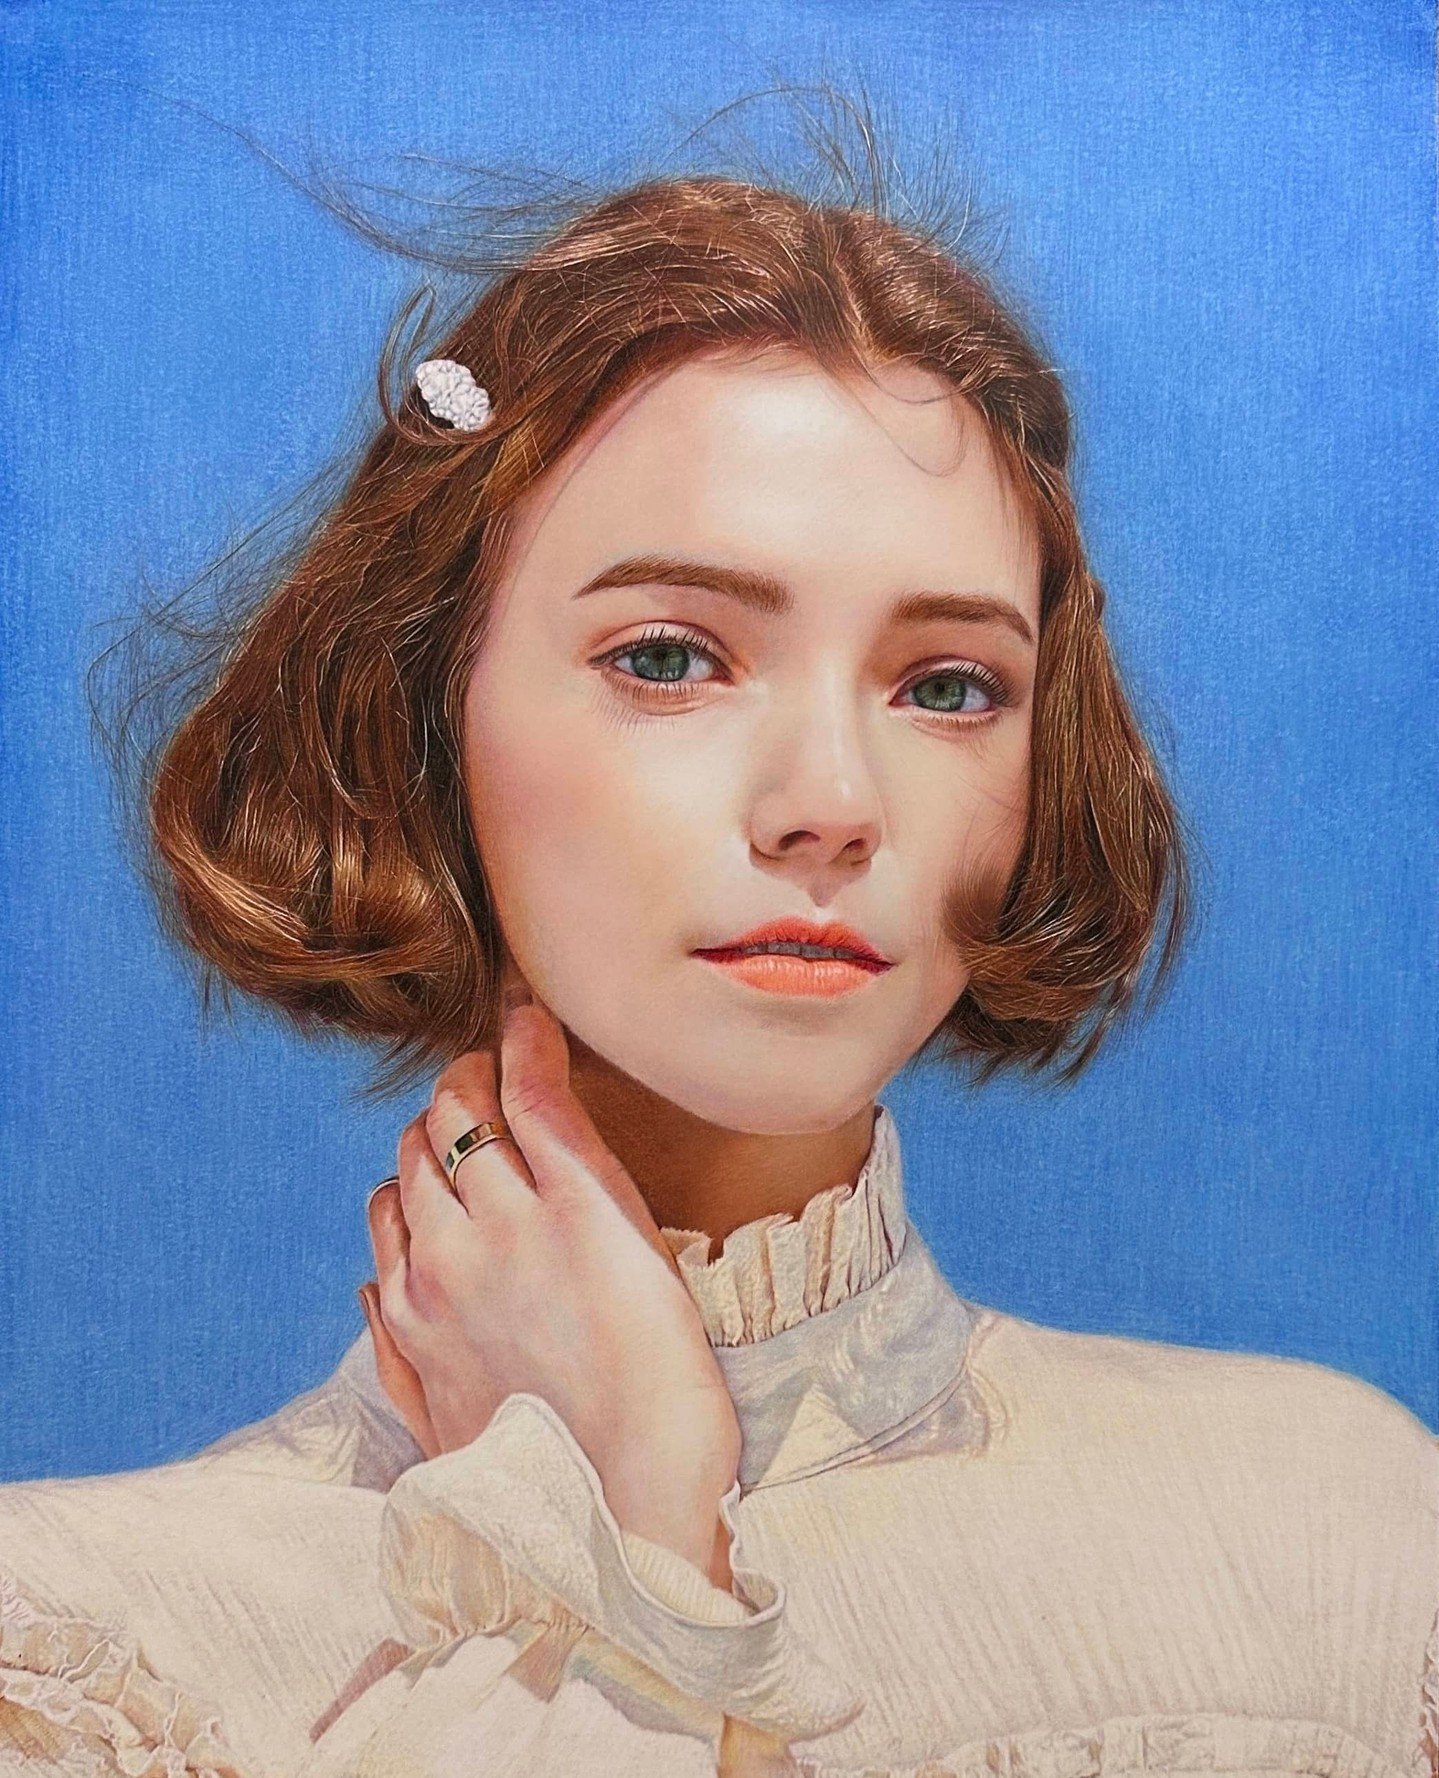 &quot;Model Under the Blue Sky&quot; is a stunning color pencil piece by March 2024 Edition Winner of the Monthly Art Award, Xiong Yanteng 👁️🖌️⁠
⁠
Double-tap and show some love! ❤️😍⁠
⁠
#colorpencilart #artist #boynesartistaward #artaward